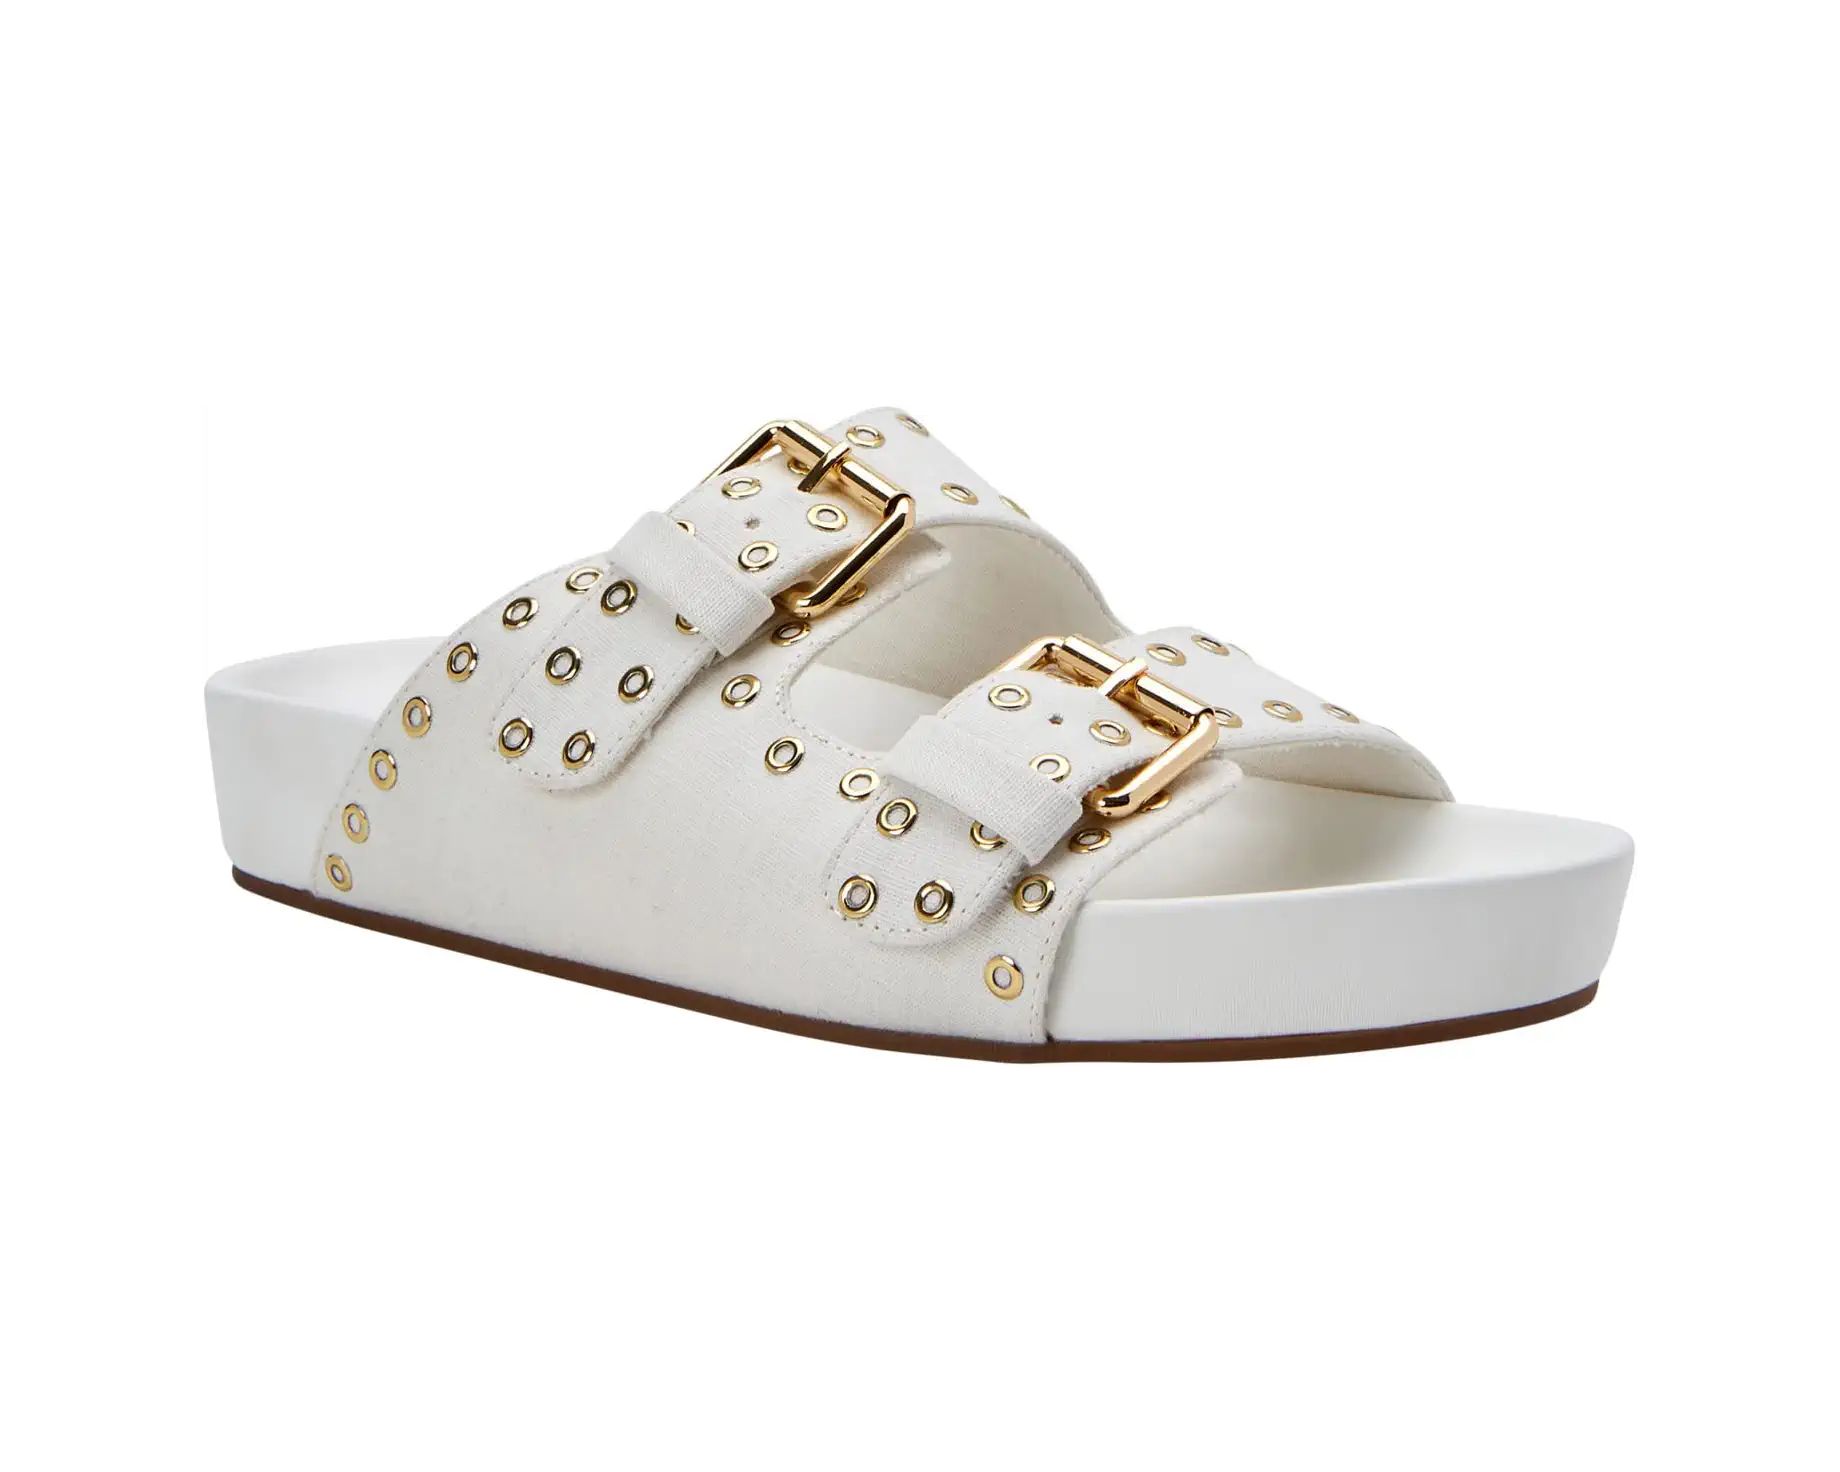 Katy Perry The Buckle Slide | Zappos